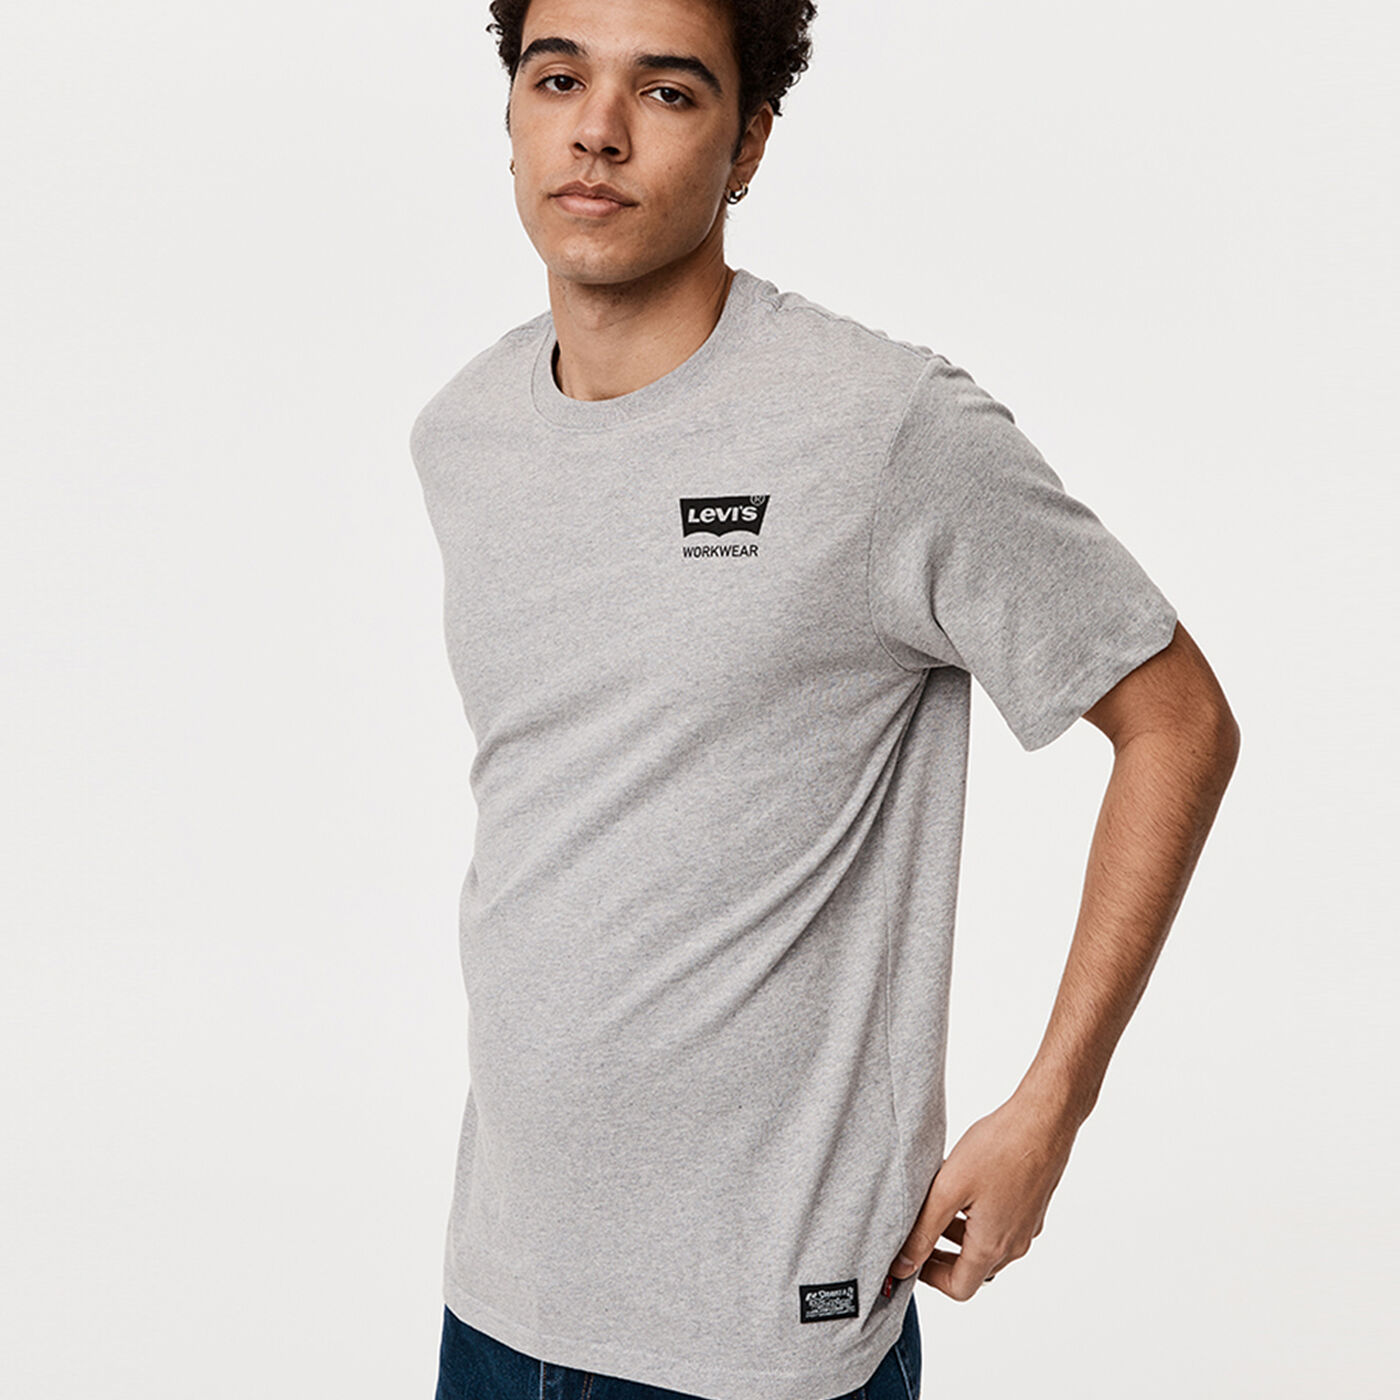 Relaxed Fit Short Sleeve T-Shirt in Lc Ww Ama Midtone Heather Grey